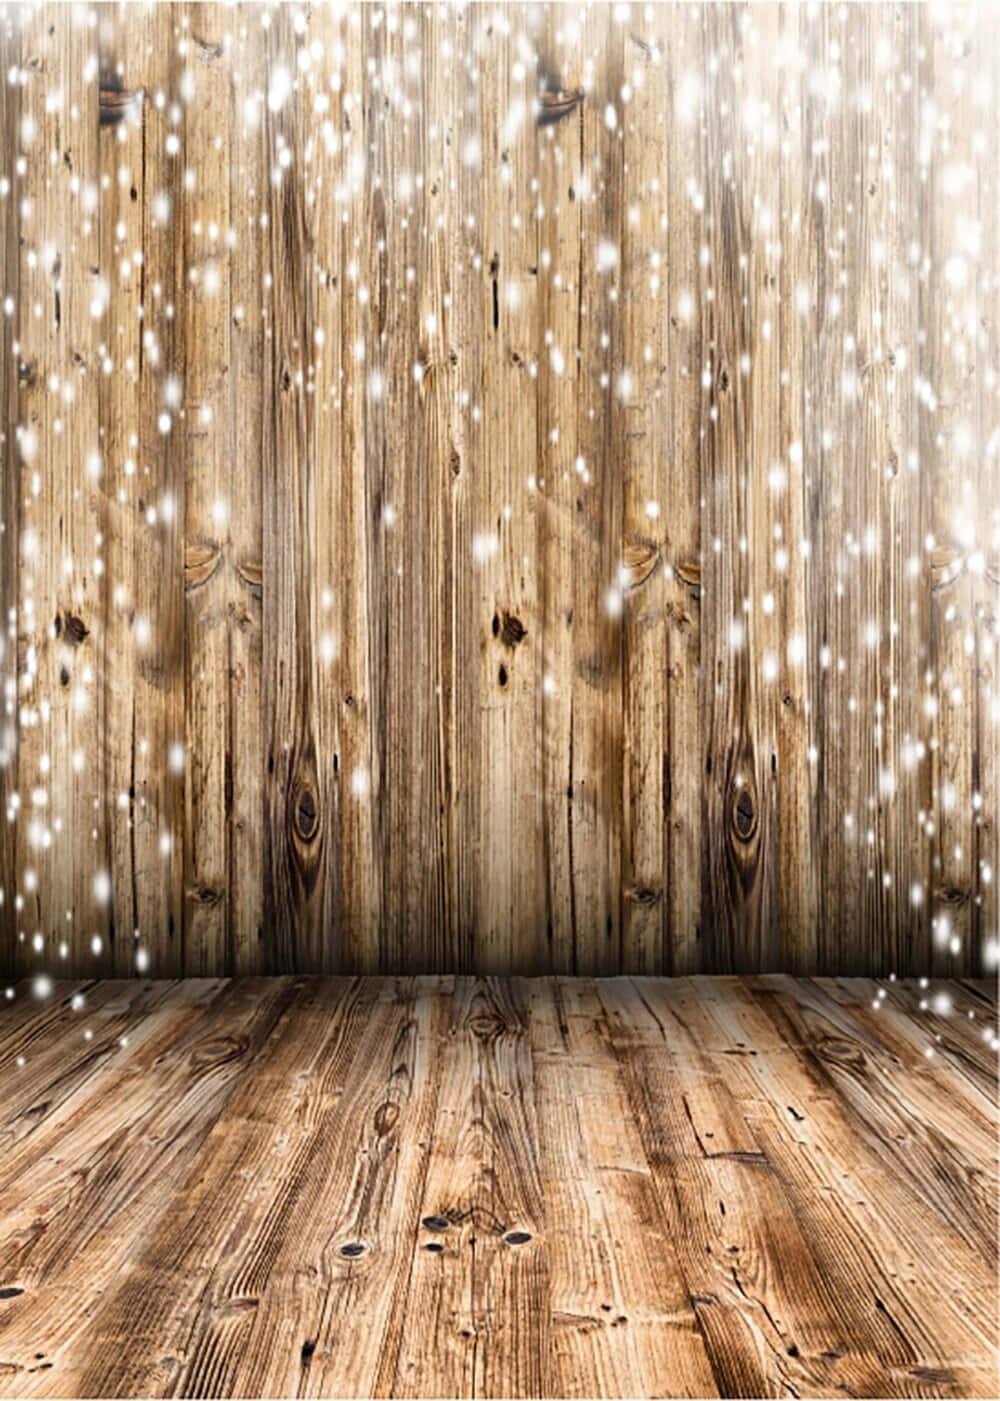 A Wooden Background With Snow Falling On It